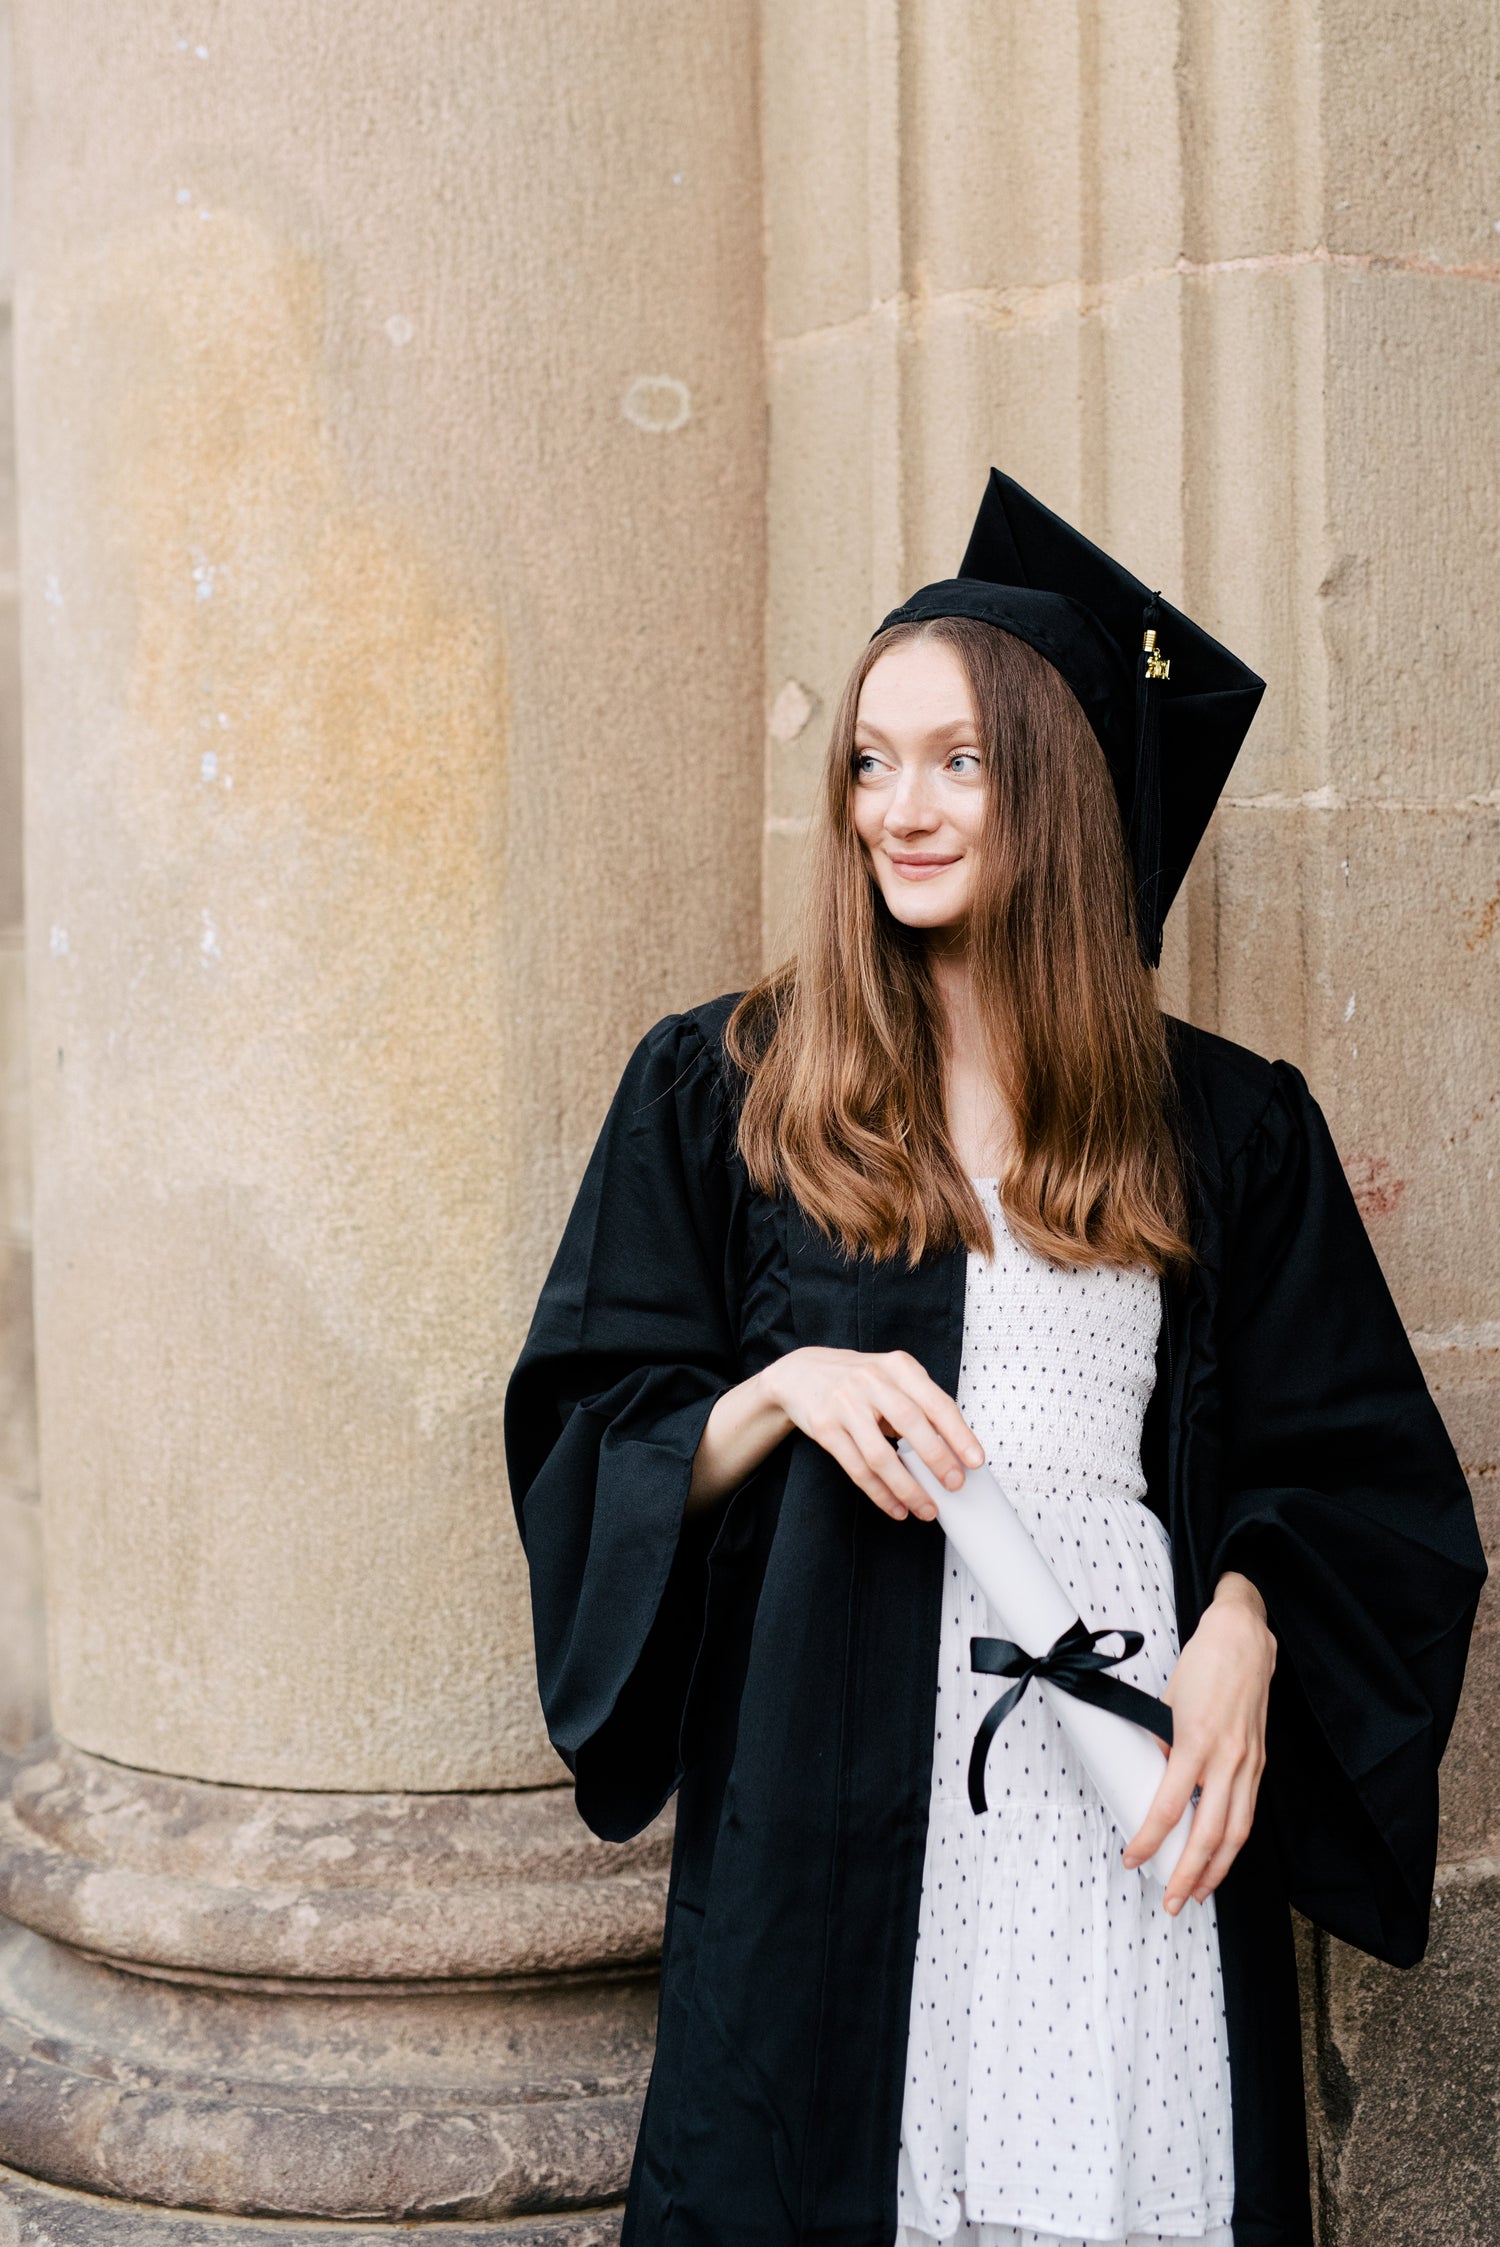 Woman who has just graduated in black academic gown smiling